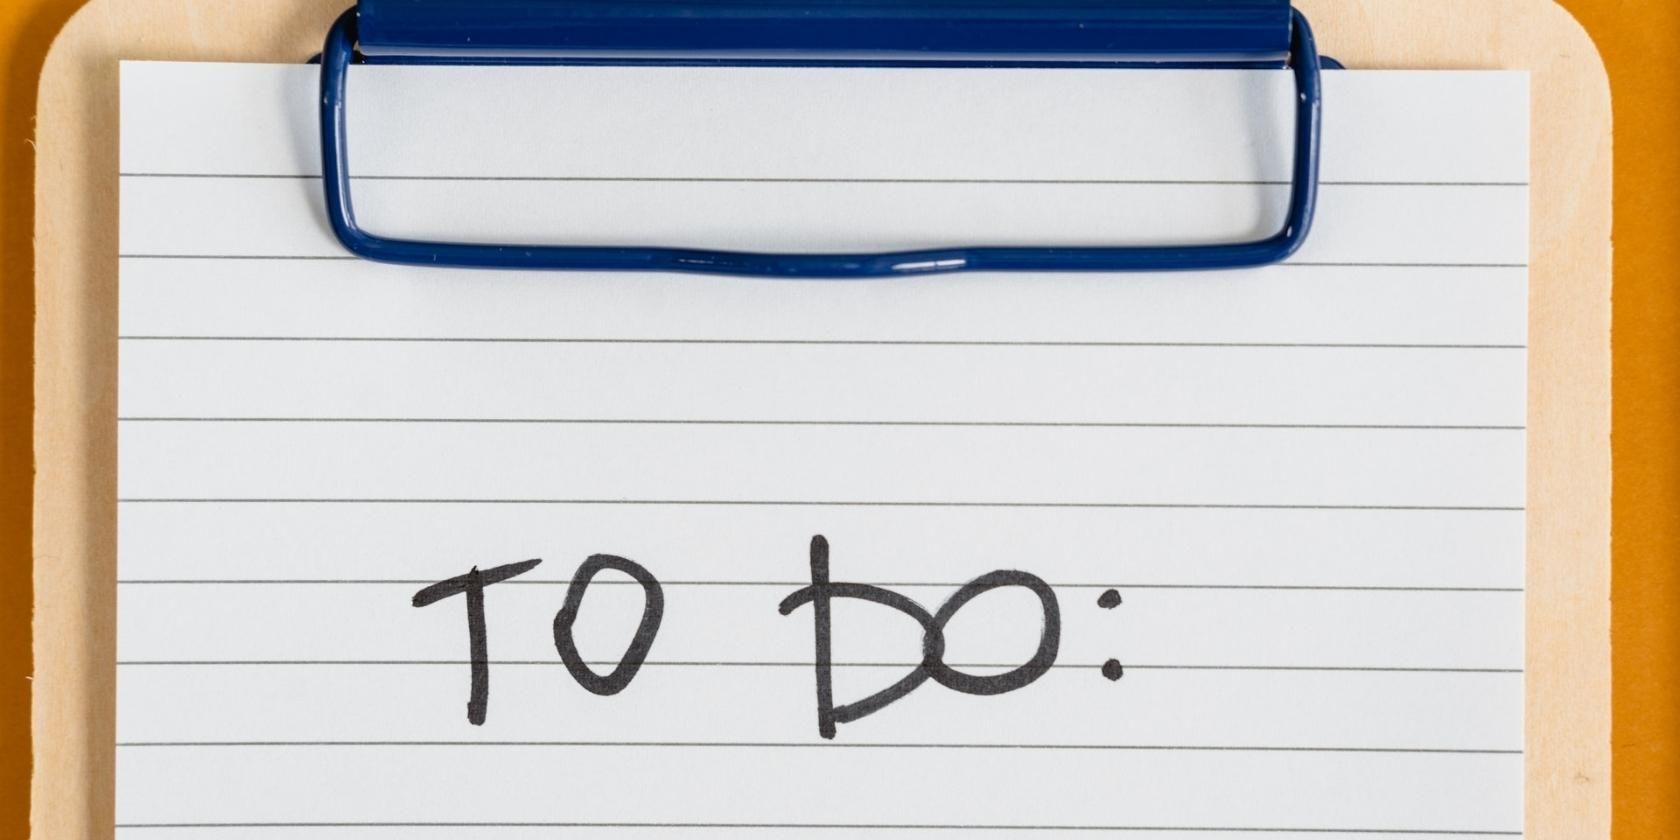 The words "TO DO" written on a clipboard.